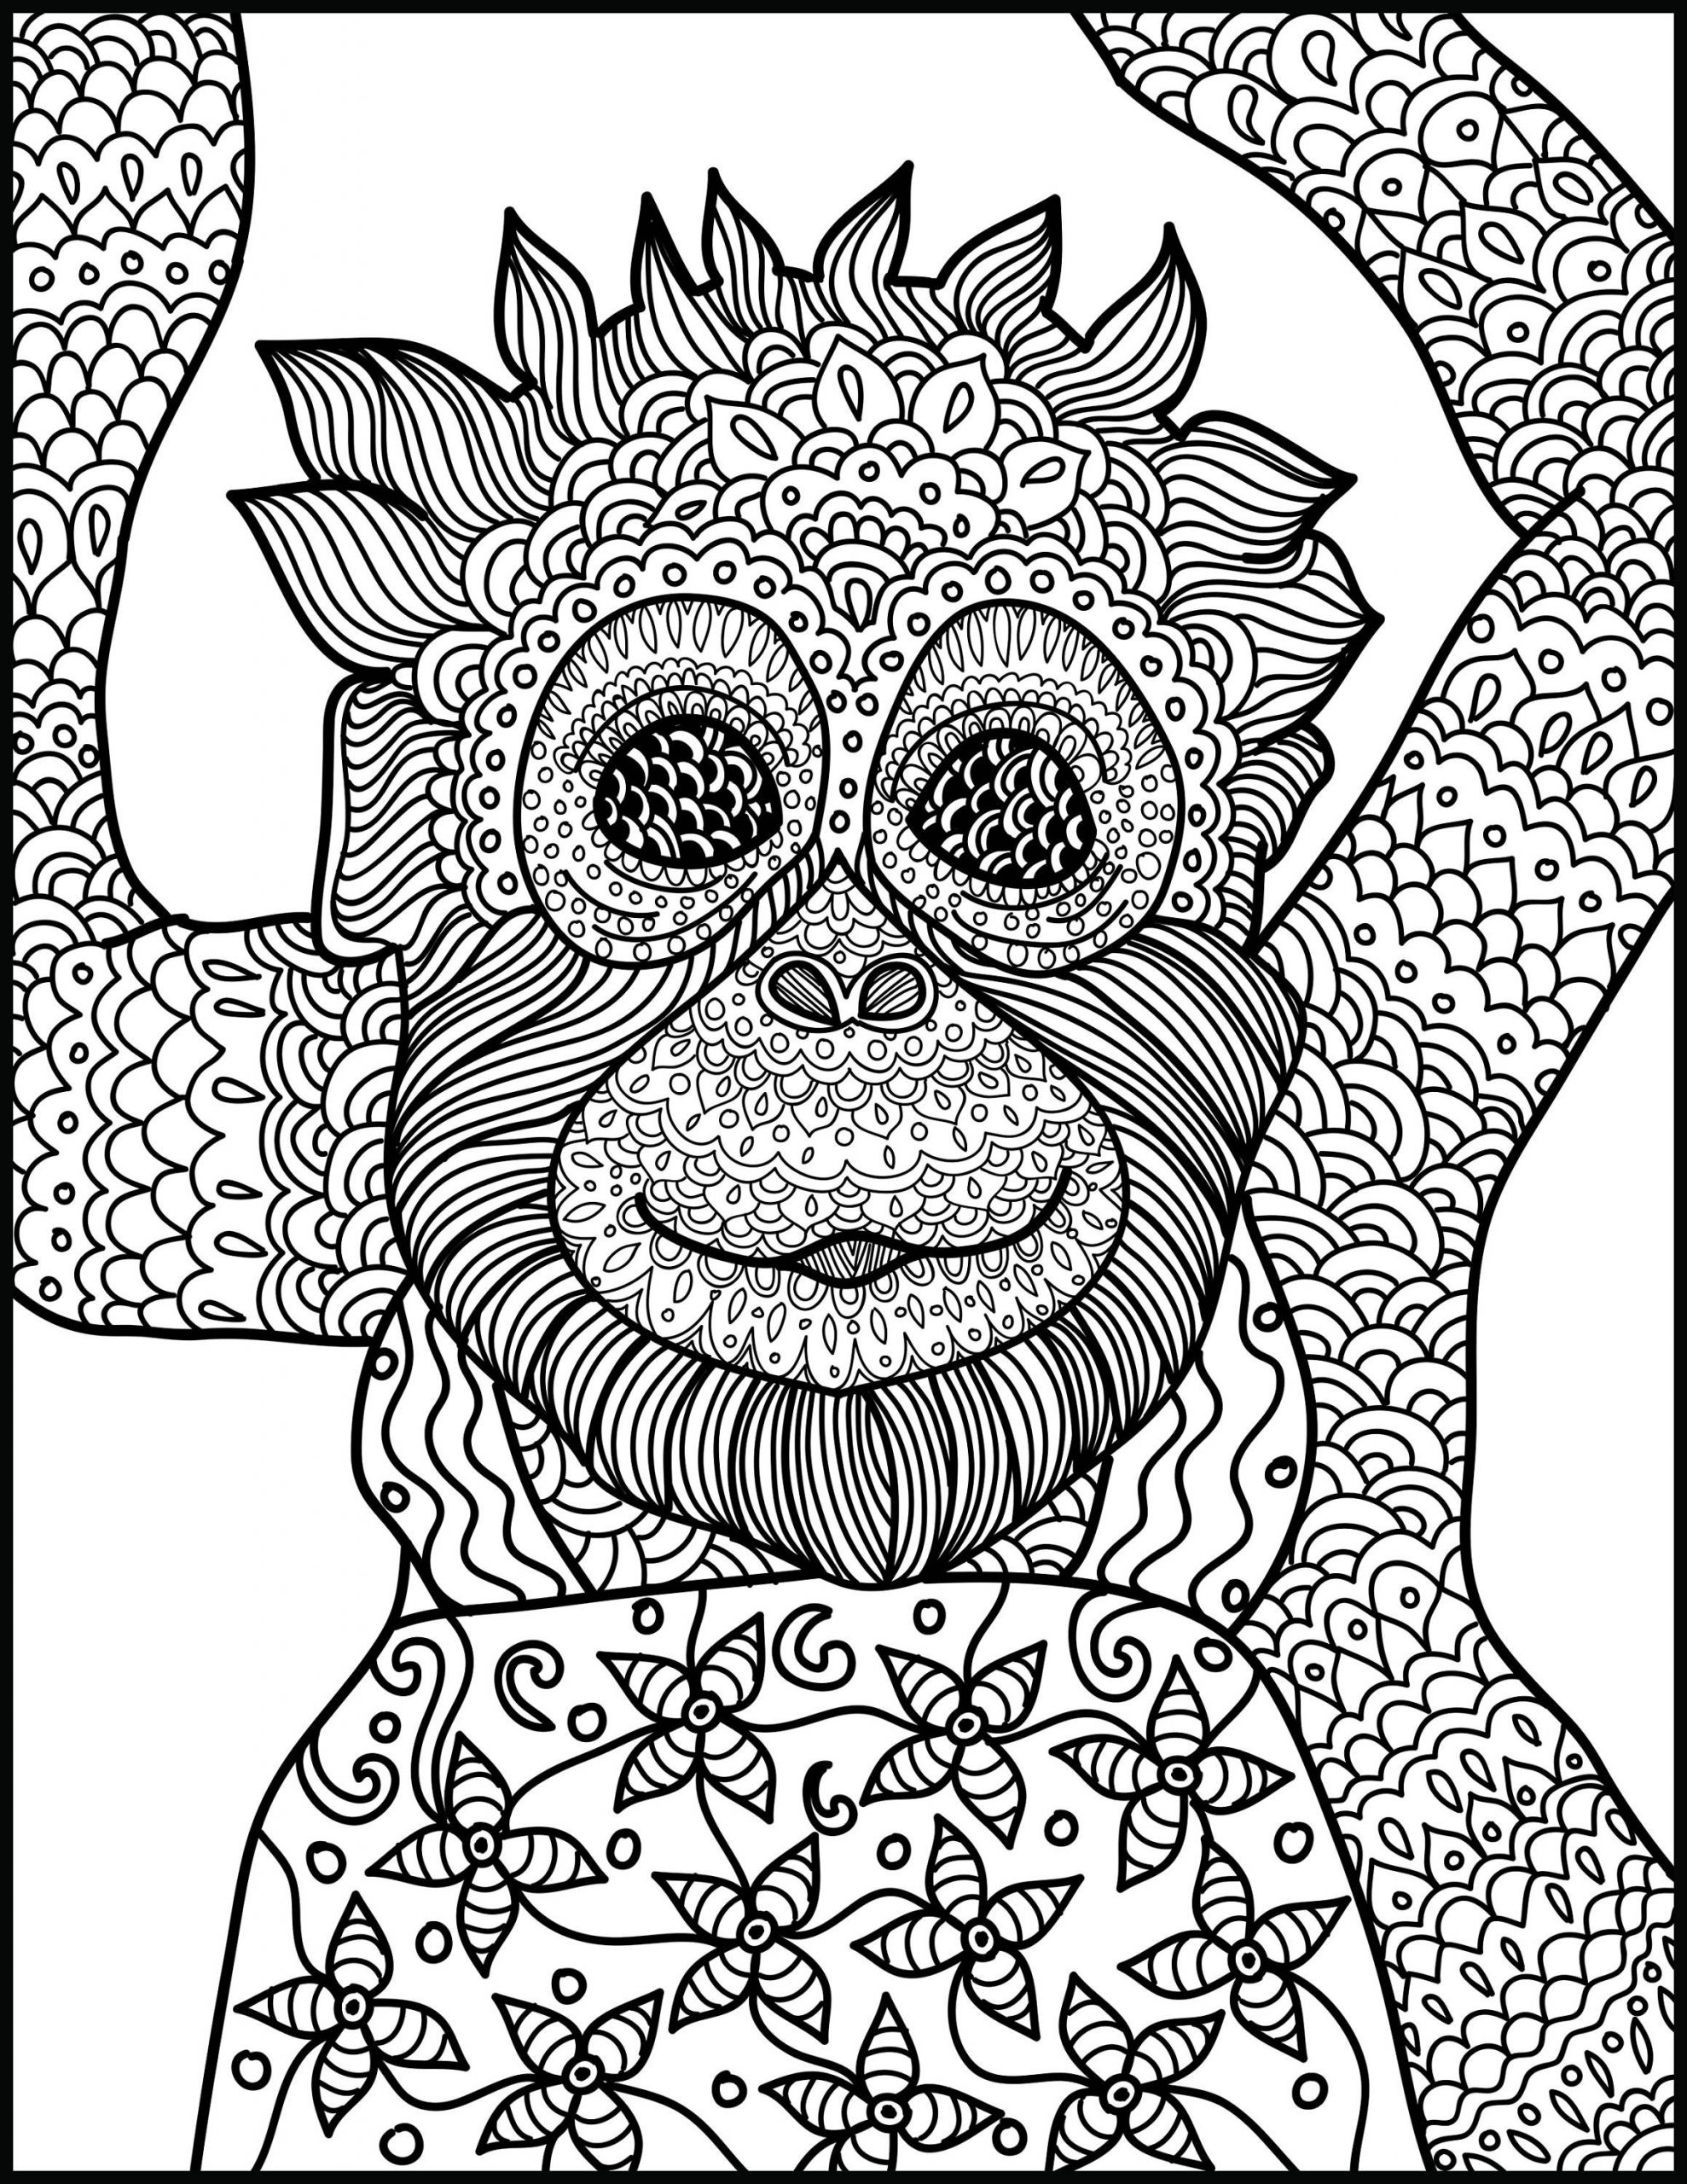 Printable Animal Coloring Pages For Adults
 Animal Coloring Page Monkey Printable Adult Coloring Page